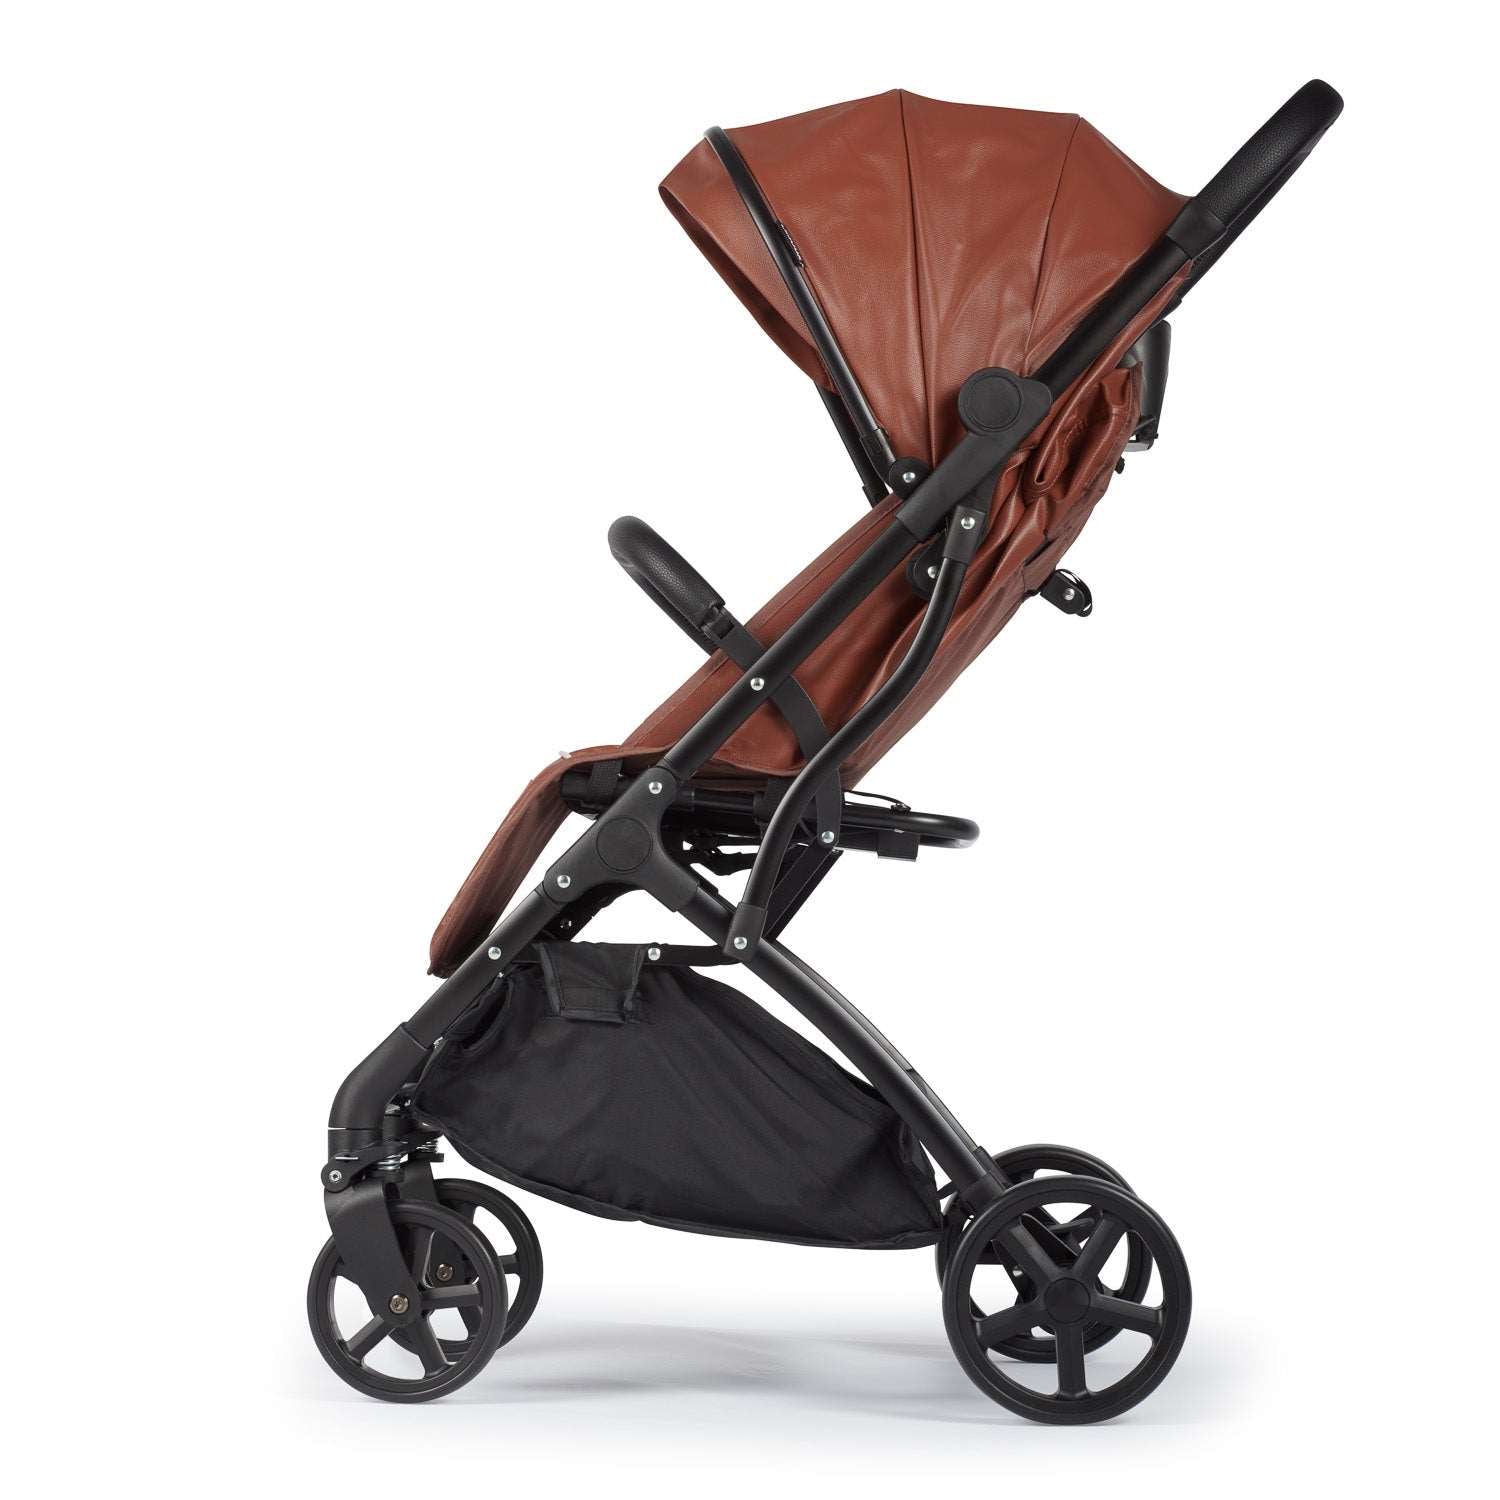 Tan Leather stroller from the side perspective